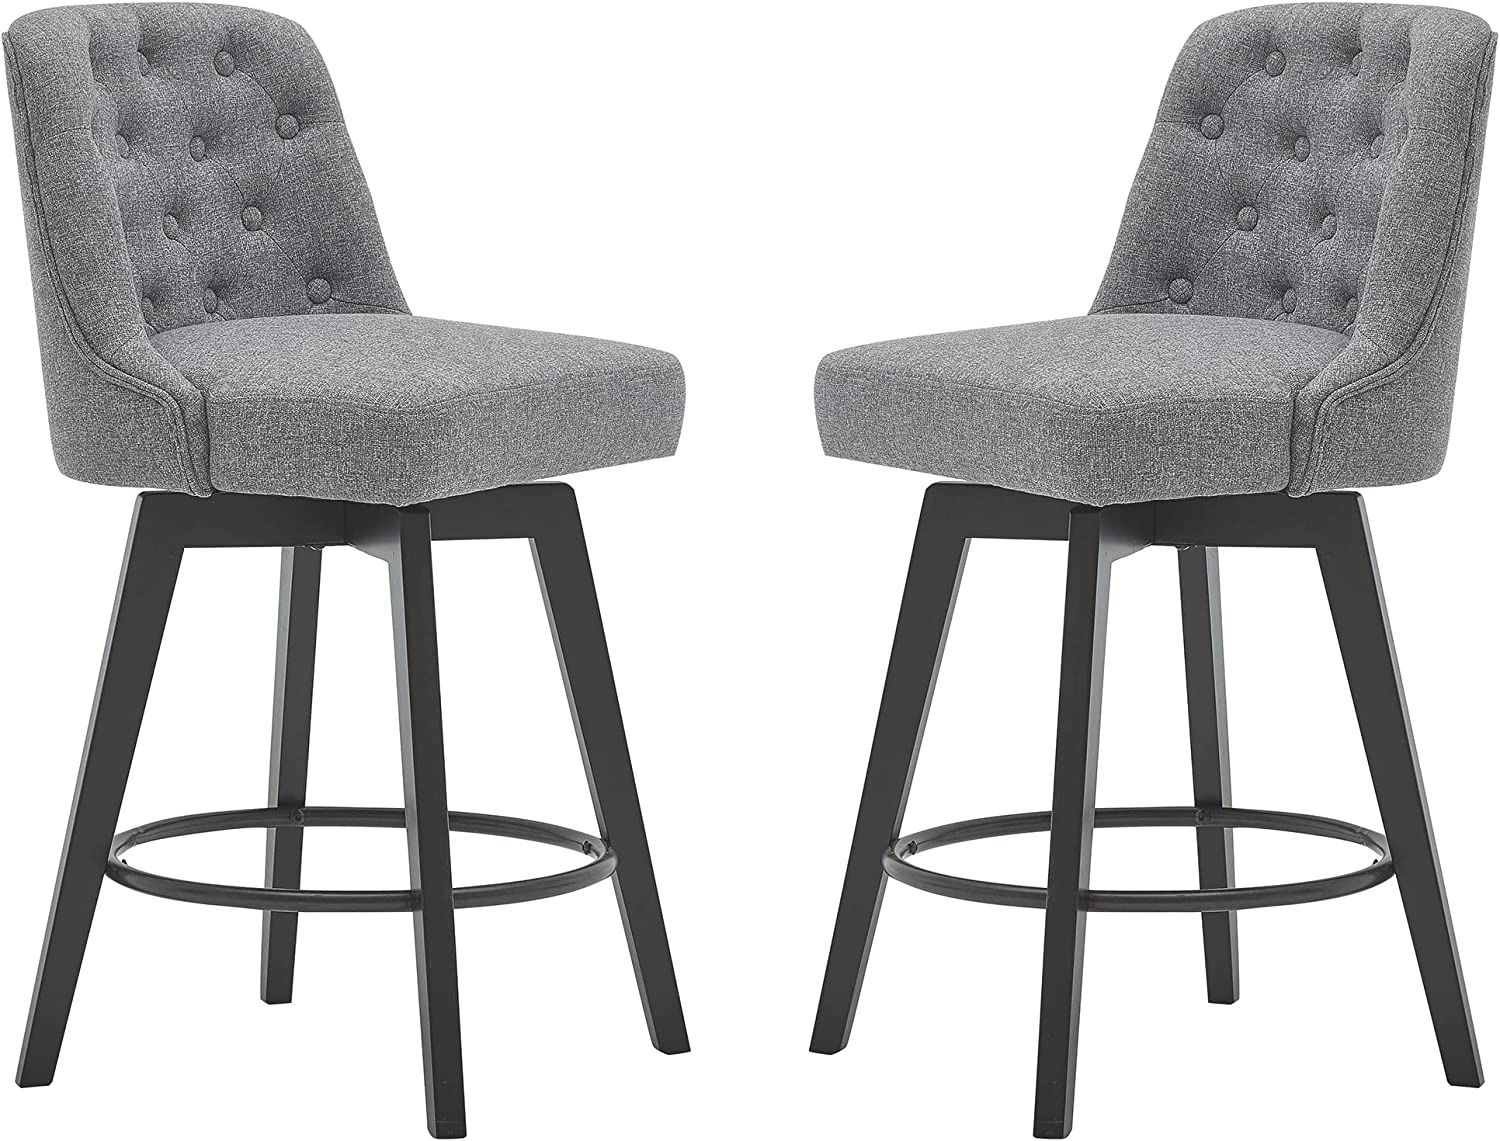 Counter Stool,26" 360 Swivel Upholstered Bar Stool with Back Set of 2,(Performance Fabric in Gray)